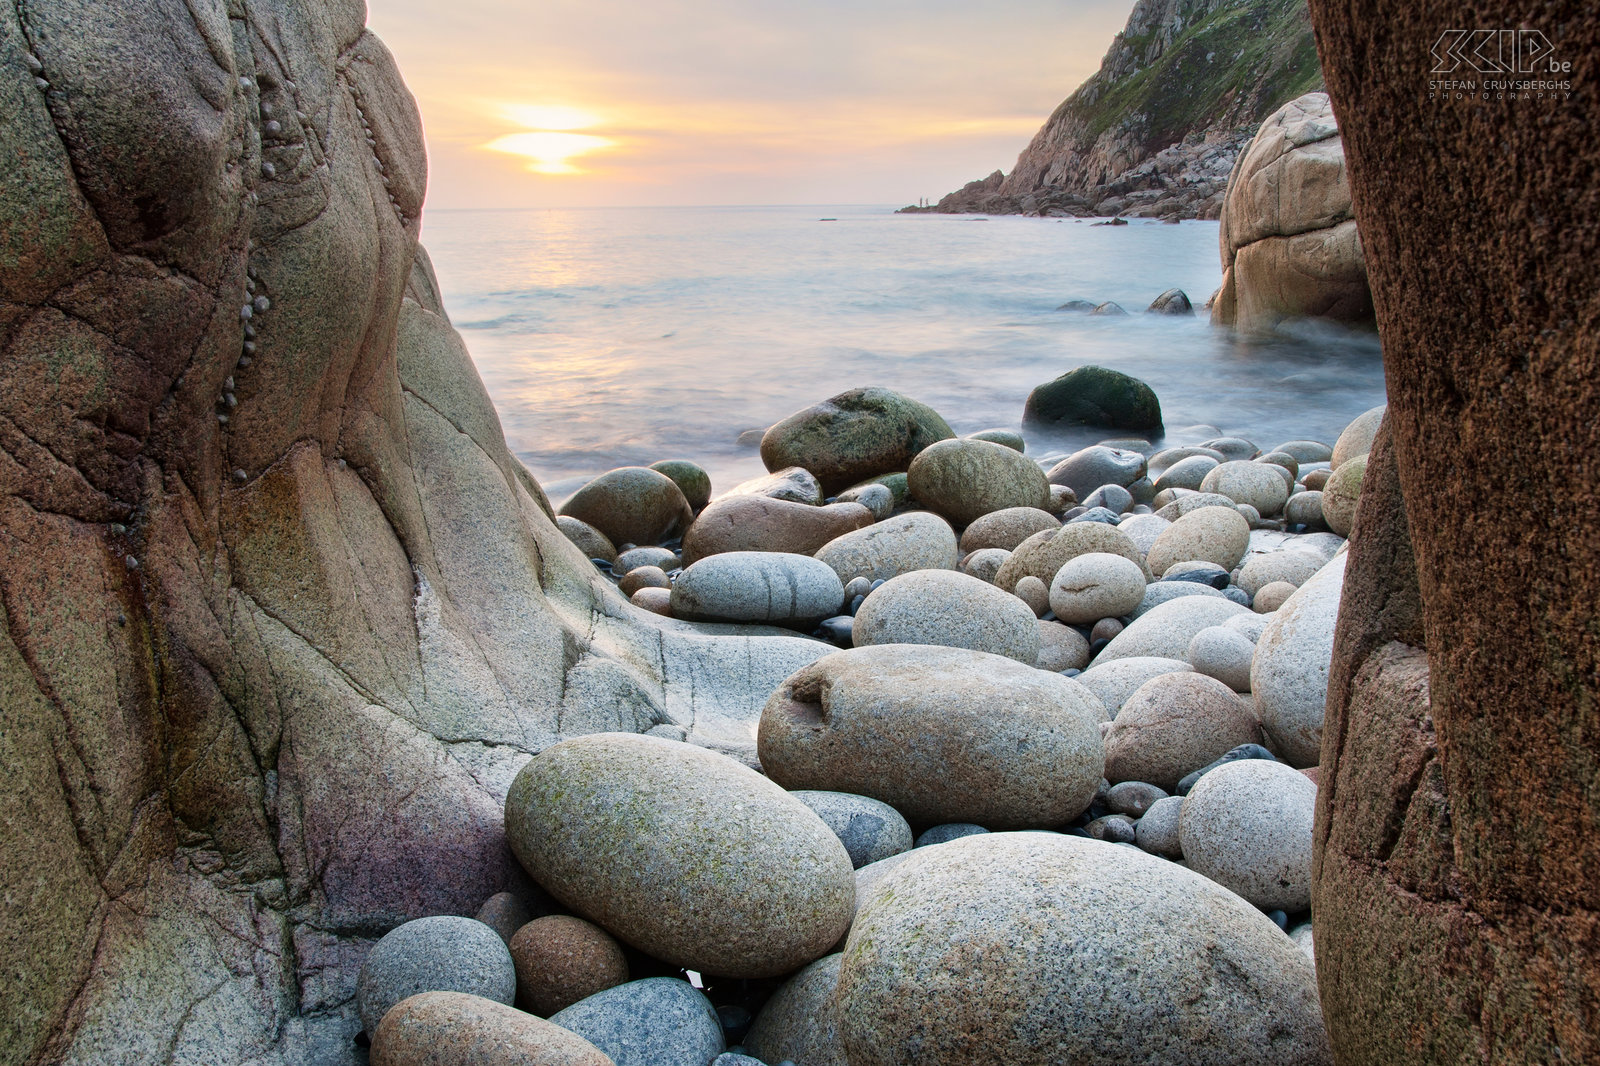 Sunset at Porth Nanven / Cot Valley Beach Porth Nanven / Cot Valley Beach is sometimes referred to as 'Dinosaur Egg Beach' because of the remarkable ovoid boulders and beautiful rock formations. The third evening there was a wonderful sunset. Stefan Cruysberghs